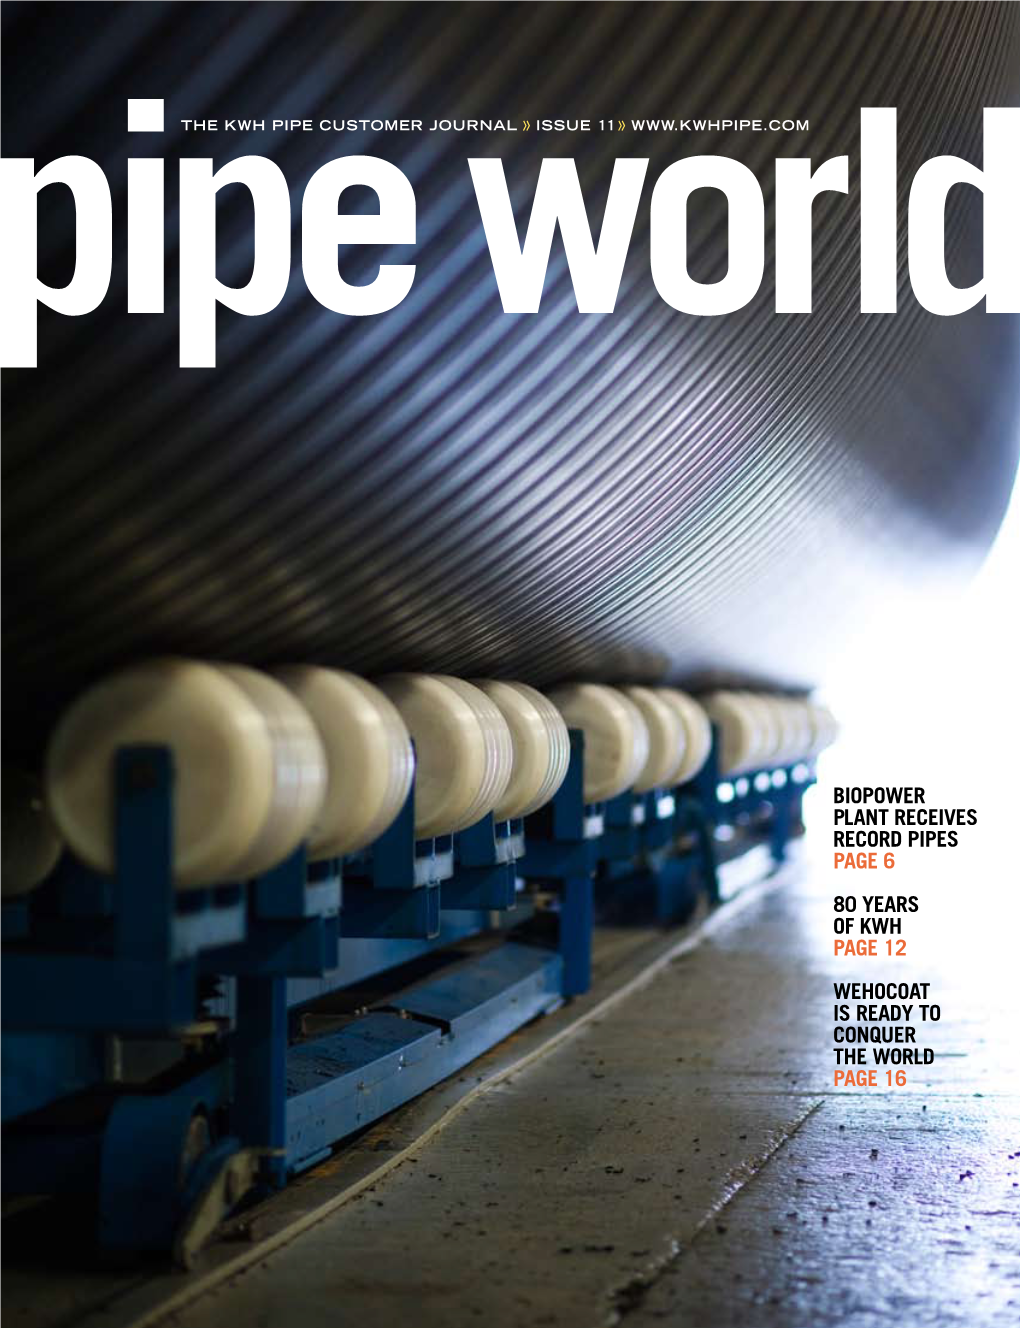 Pipe World ISSUE 11 1 What Similarities Can Be Found Between KWH Pipe’S ...